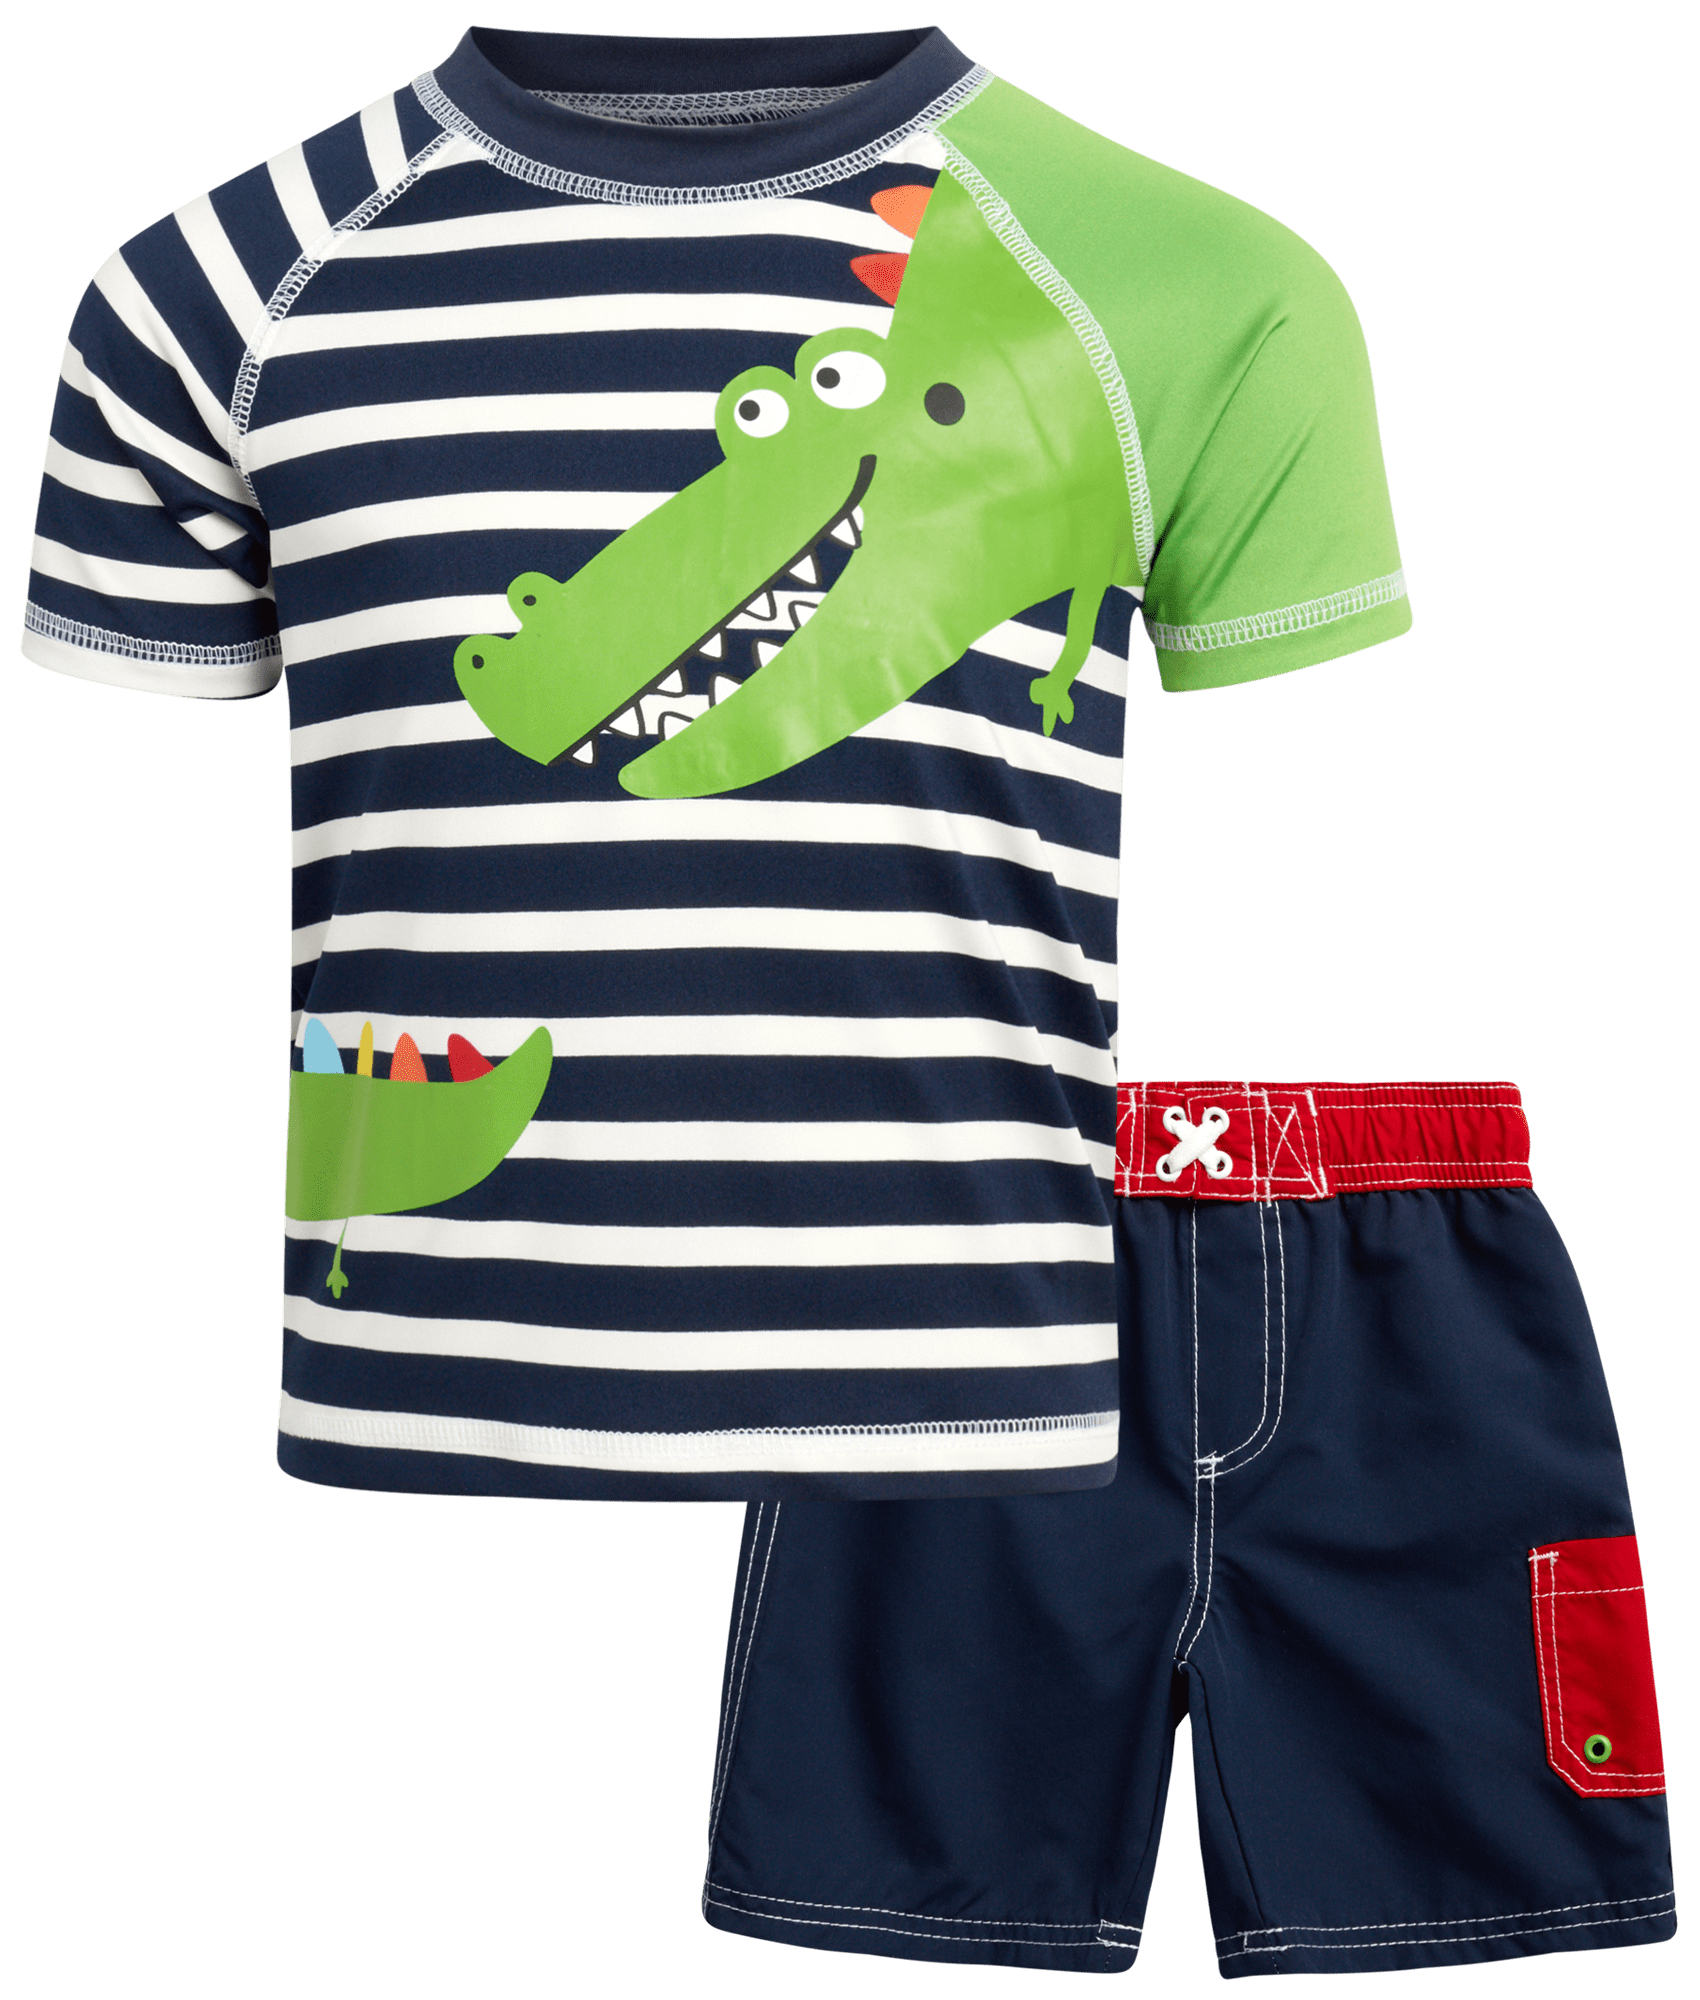 Rash Guard UPF 50+ and Swimsuit Trunk 2-Piece Set Wippette Boys Swimwear Infant/Toddlers Sharks/Crabs/Dinosaurs 